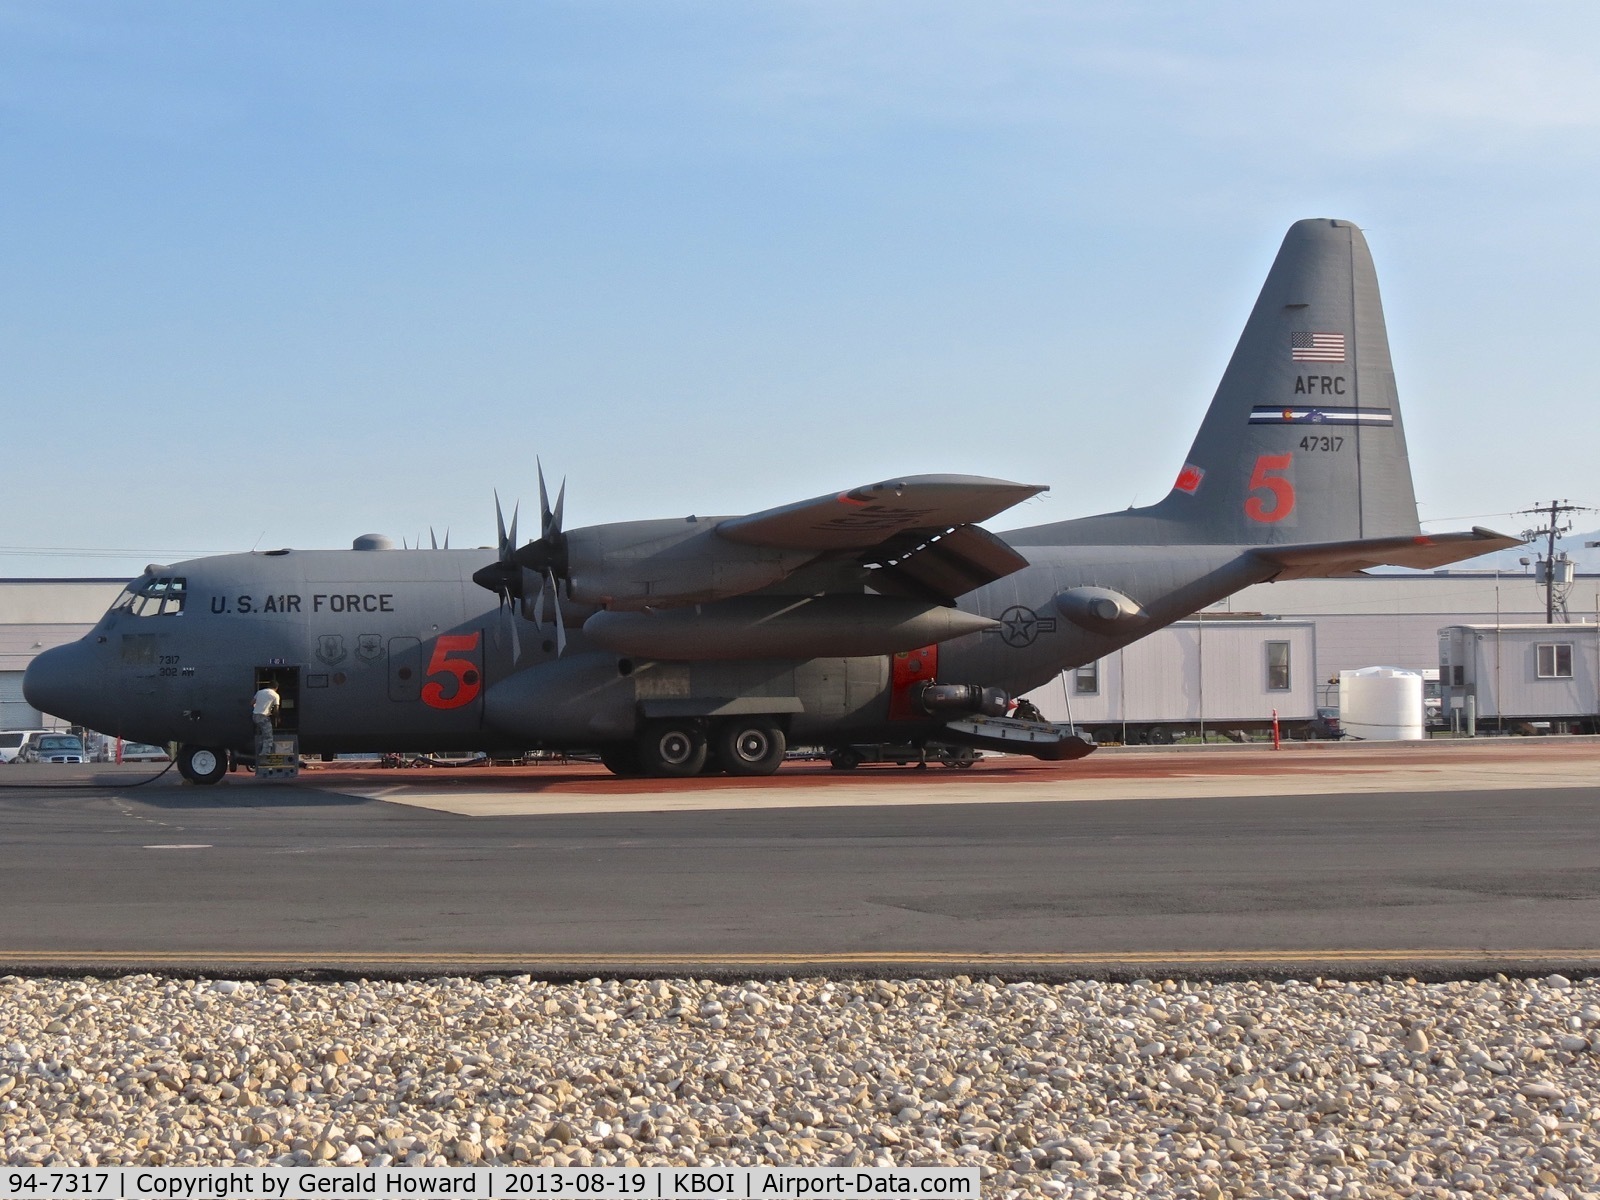 94-7317, 1994 Lockheed C-130H Hercules C/N 382-5391, Parked on the NIFC ramp equipped with MAFFS.  302nd Air Wing – AFRC  Peterson AFB, CO